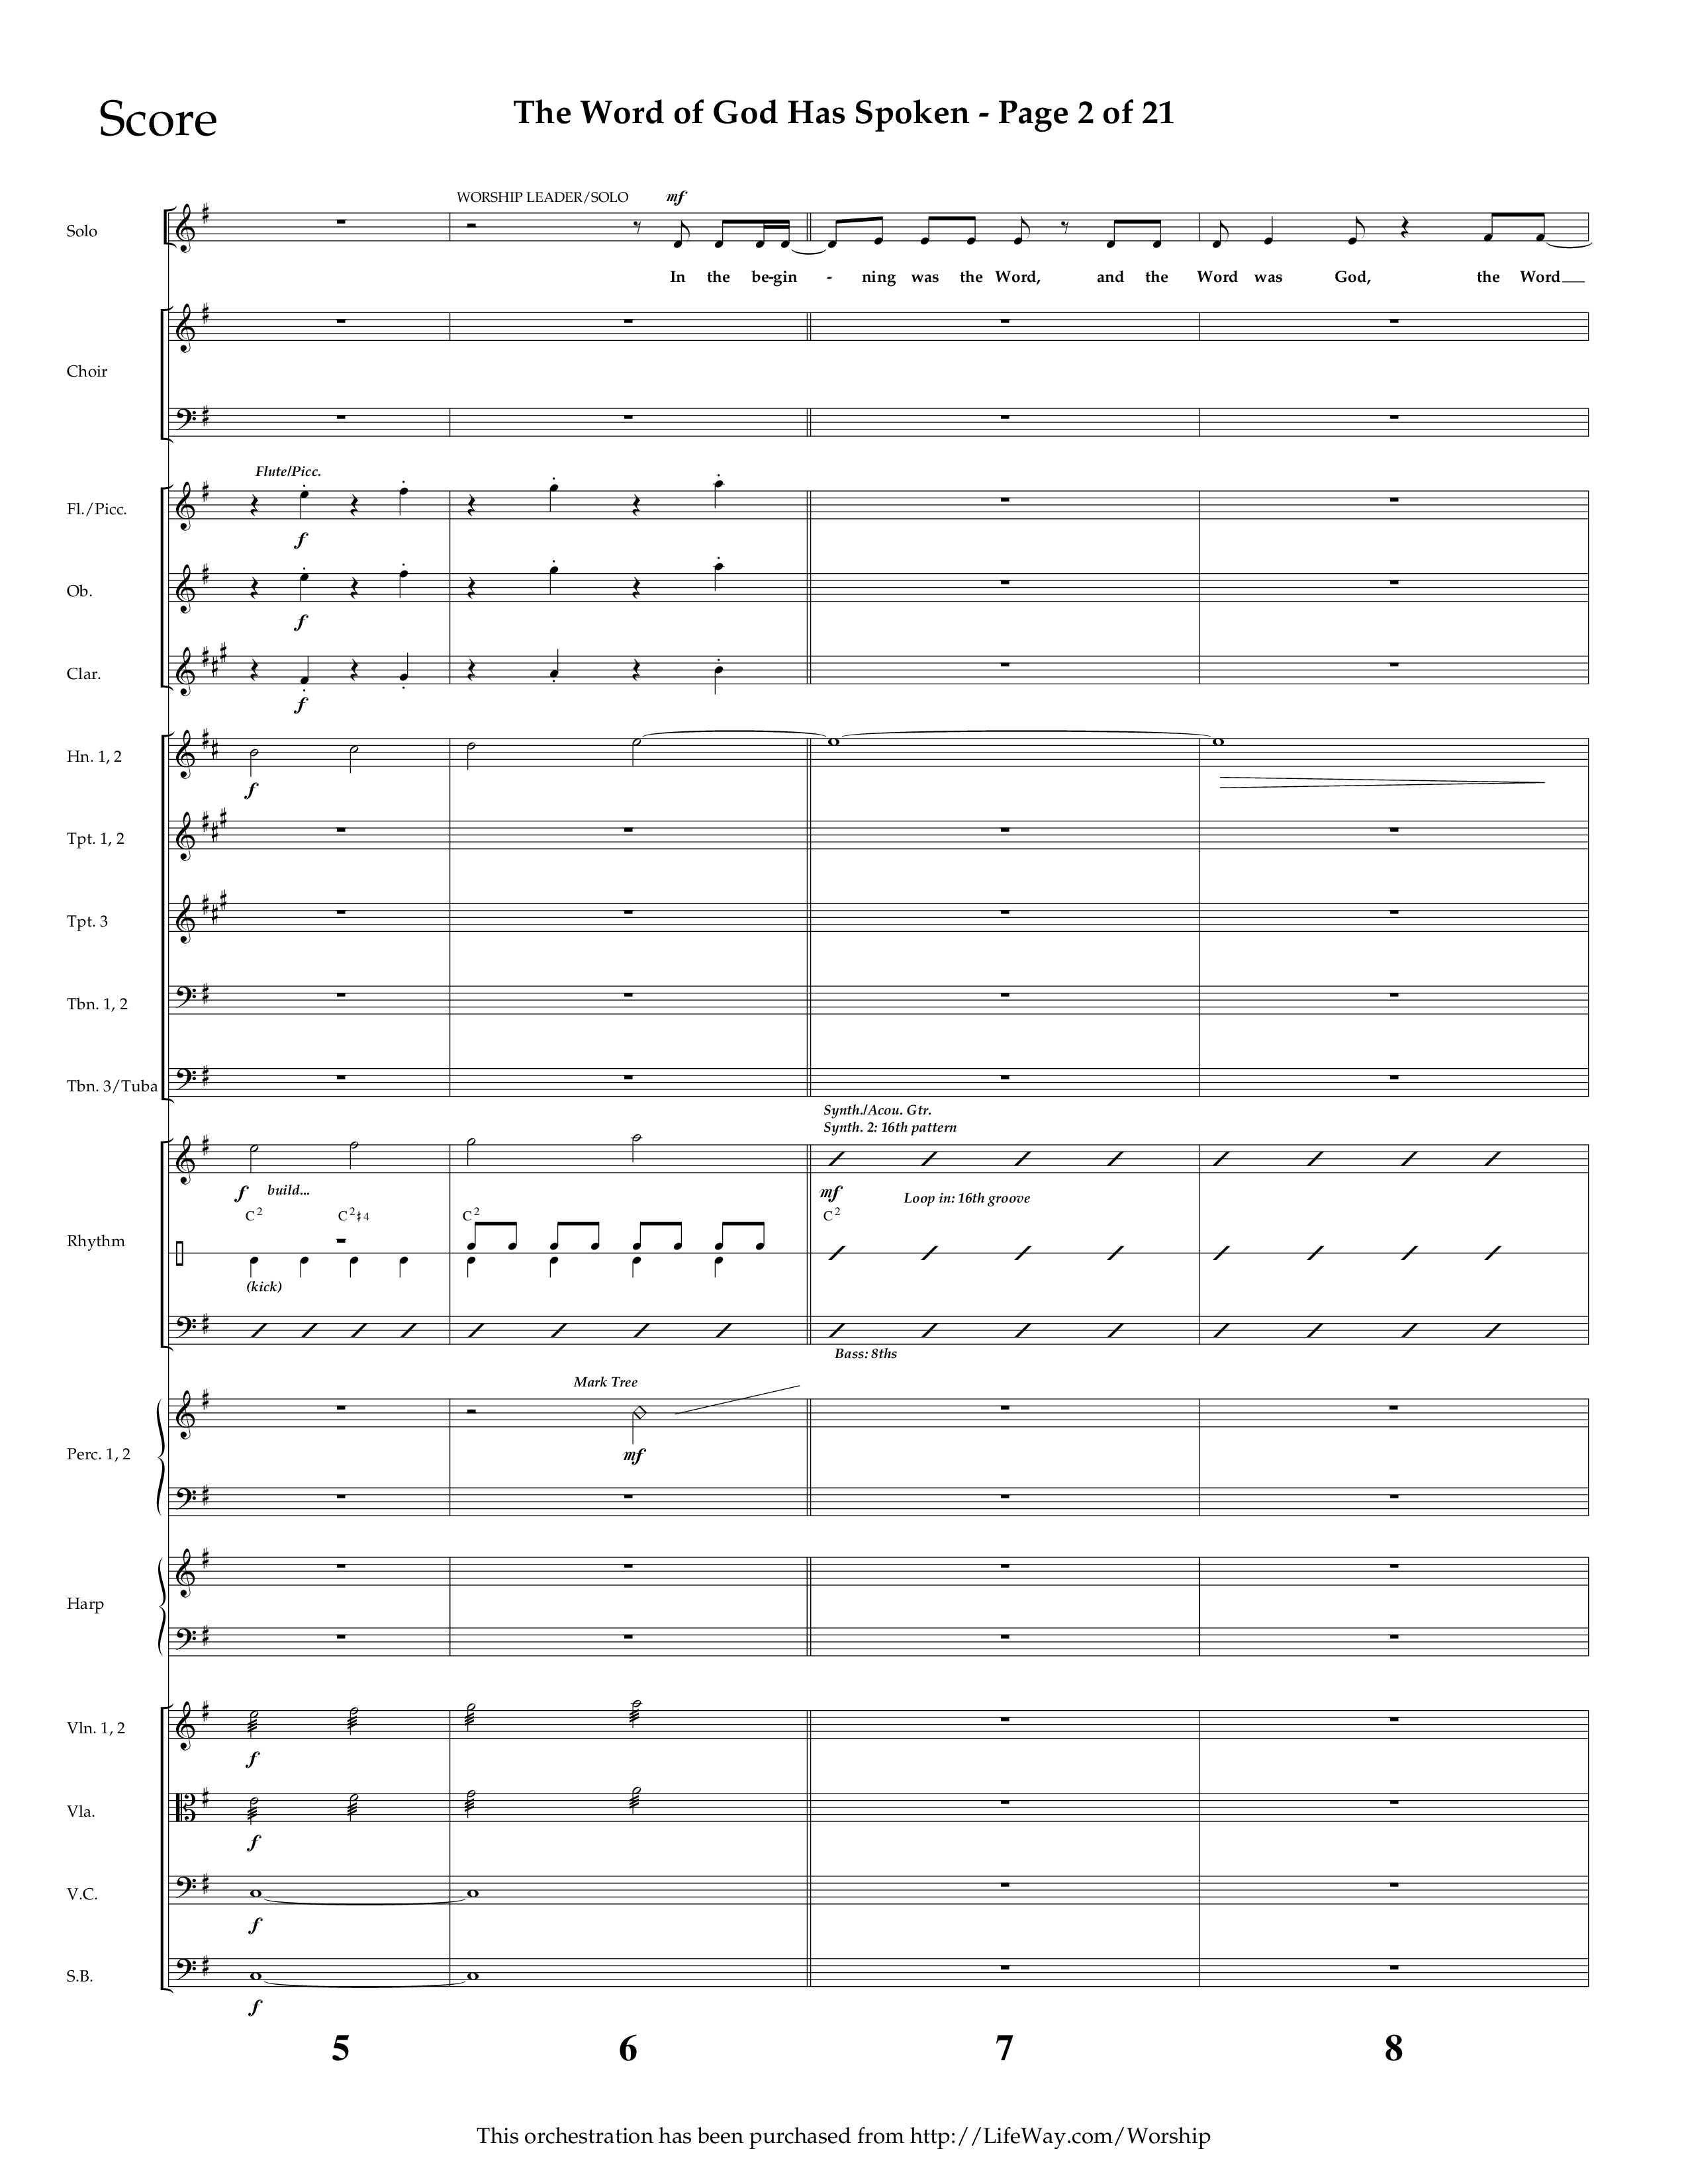 The Word Of God Has Spoken (Choral Anthem SATB) Orchestration (Lifeway Choral / Arr. Dave Williamson)